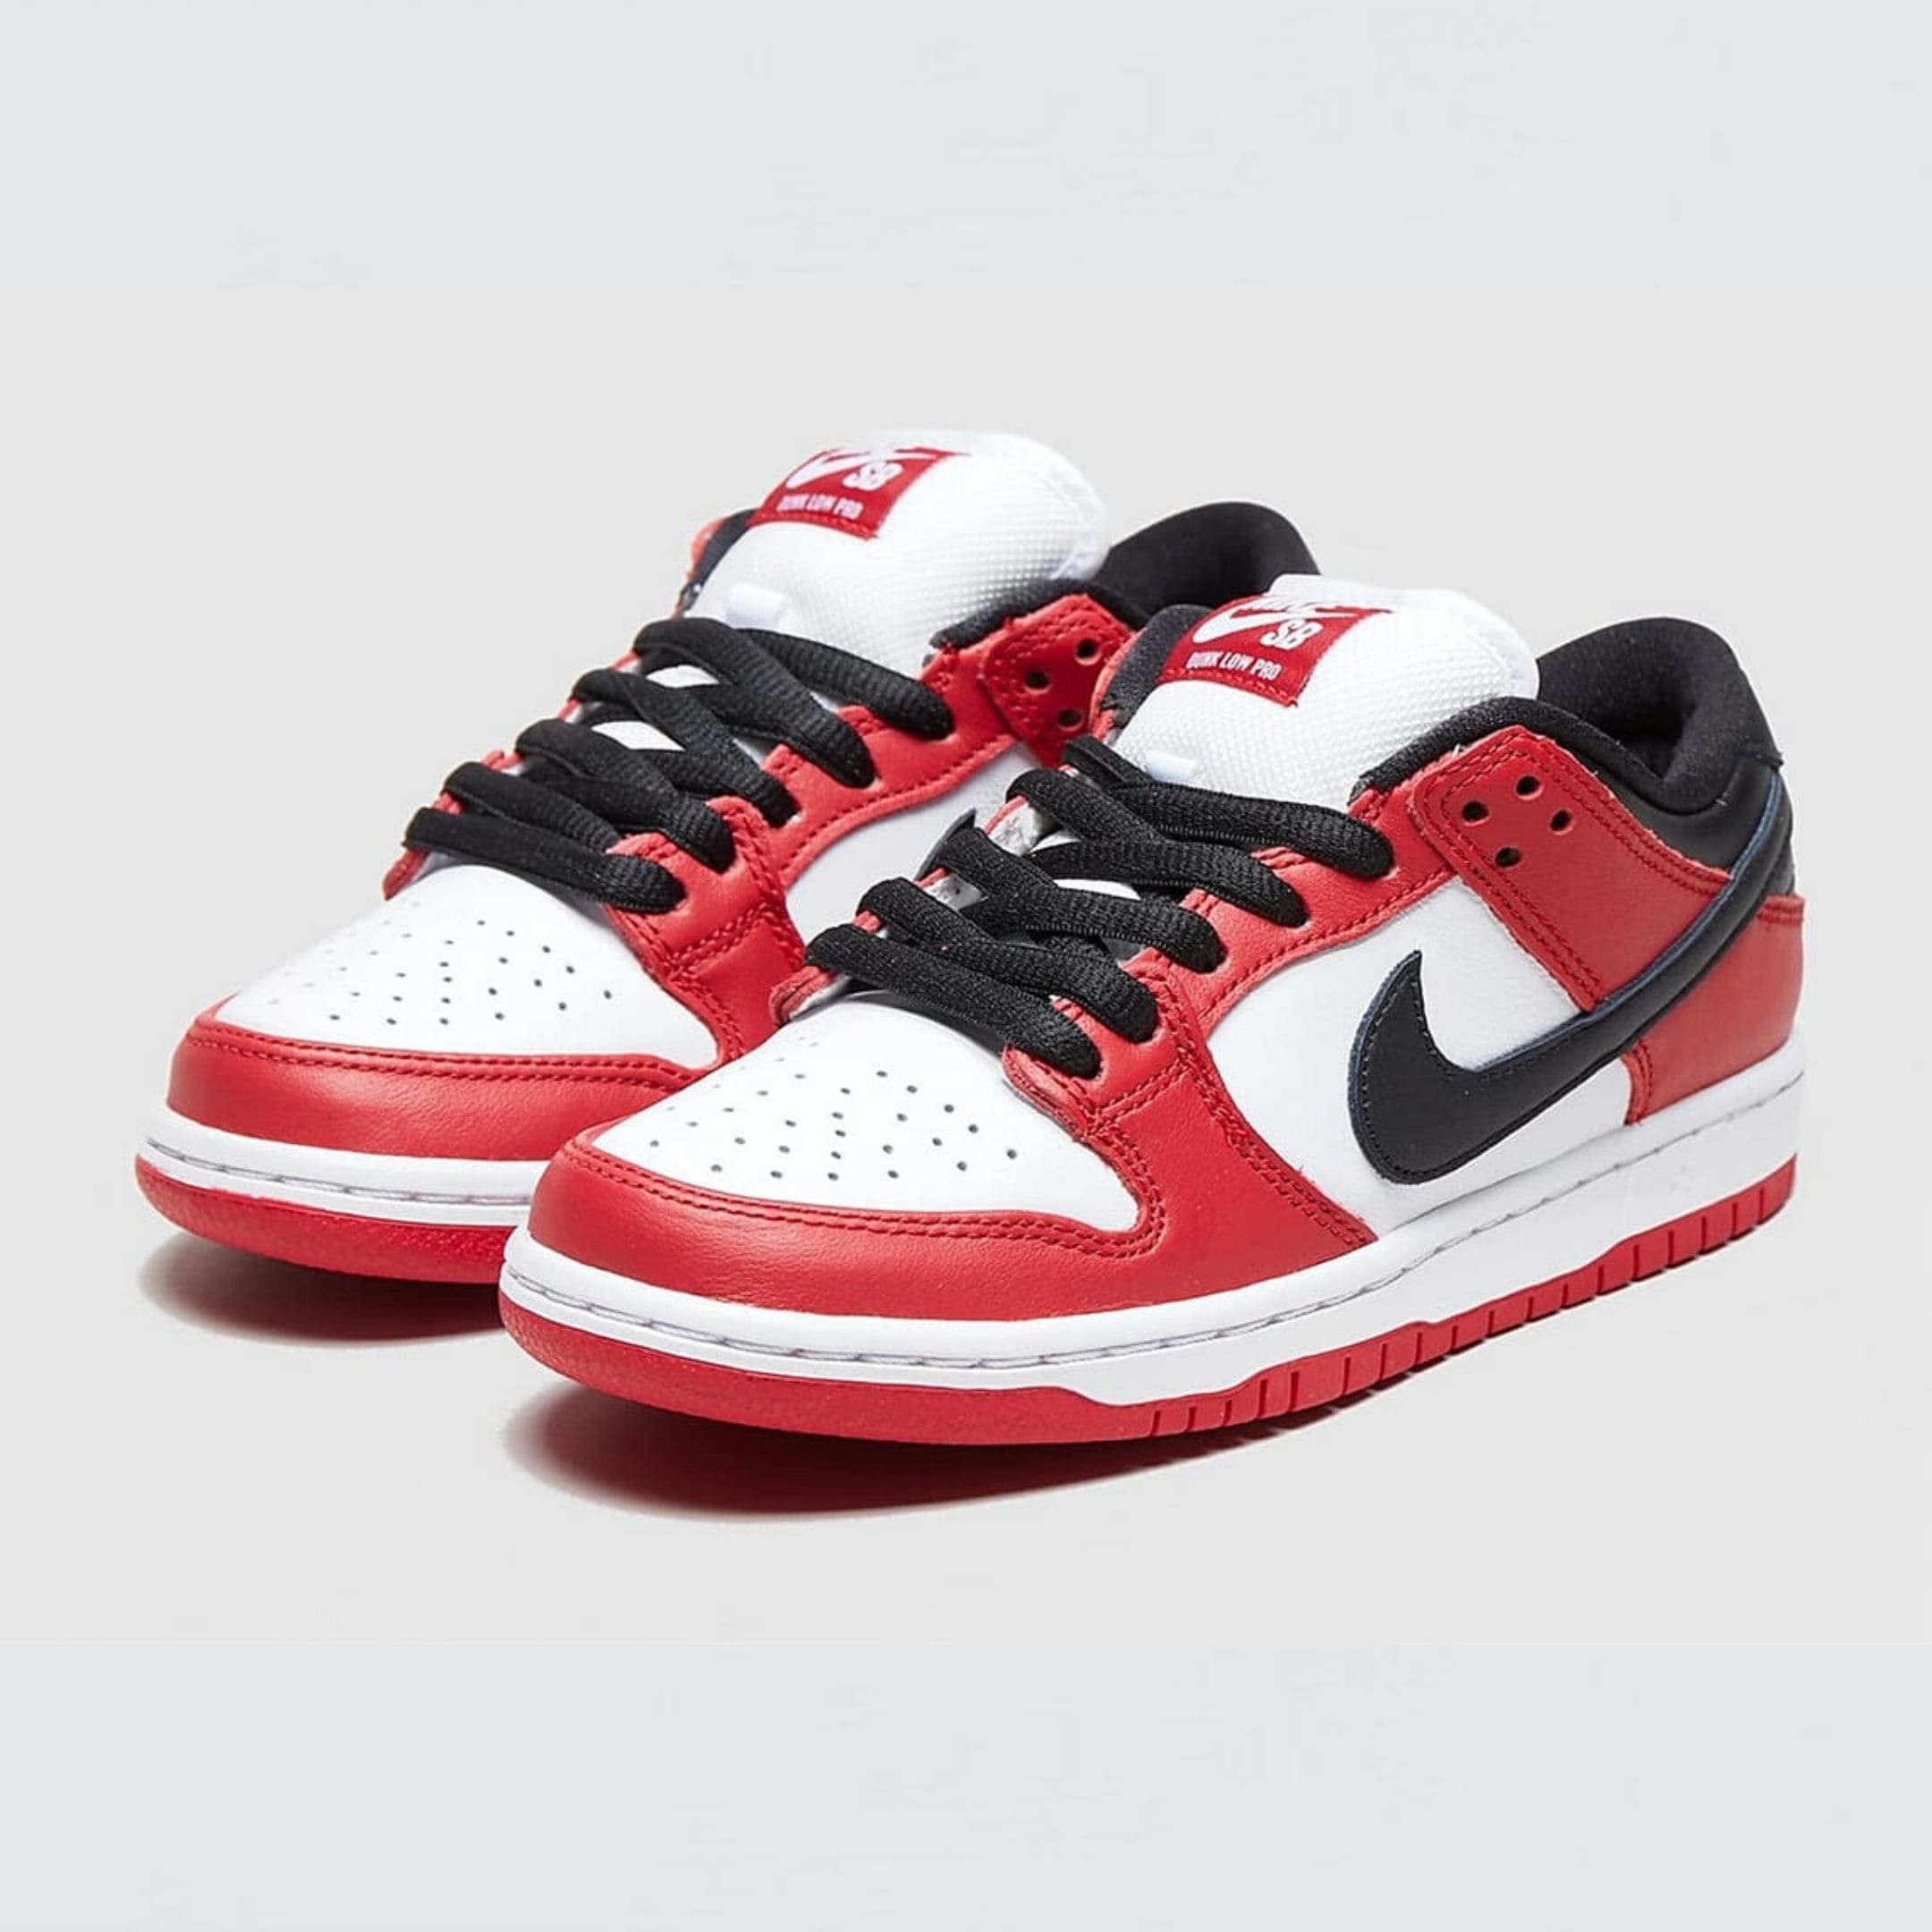 nike-sb-dunk-low-chicago-release-info-everysize-blog